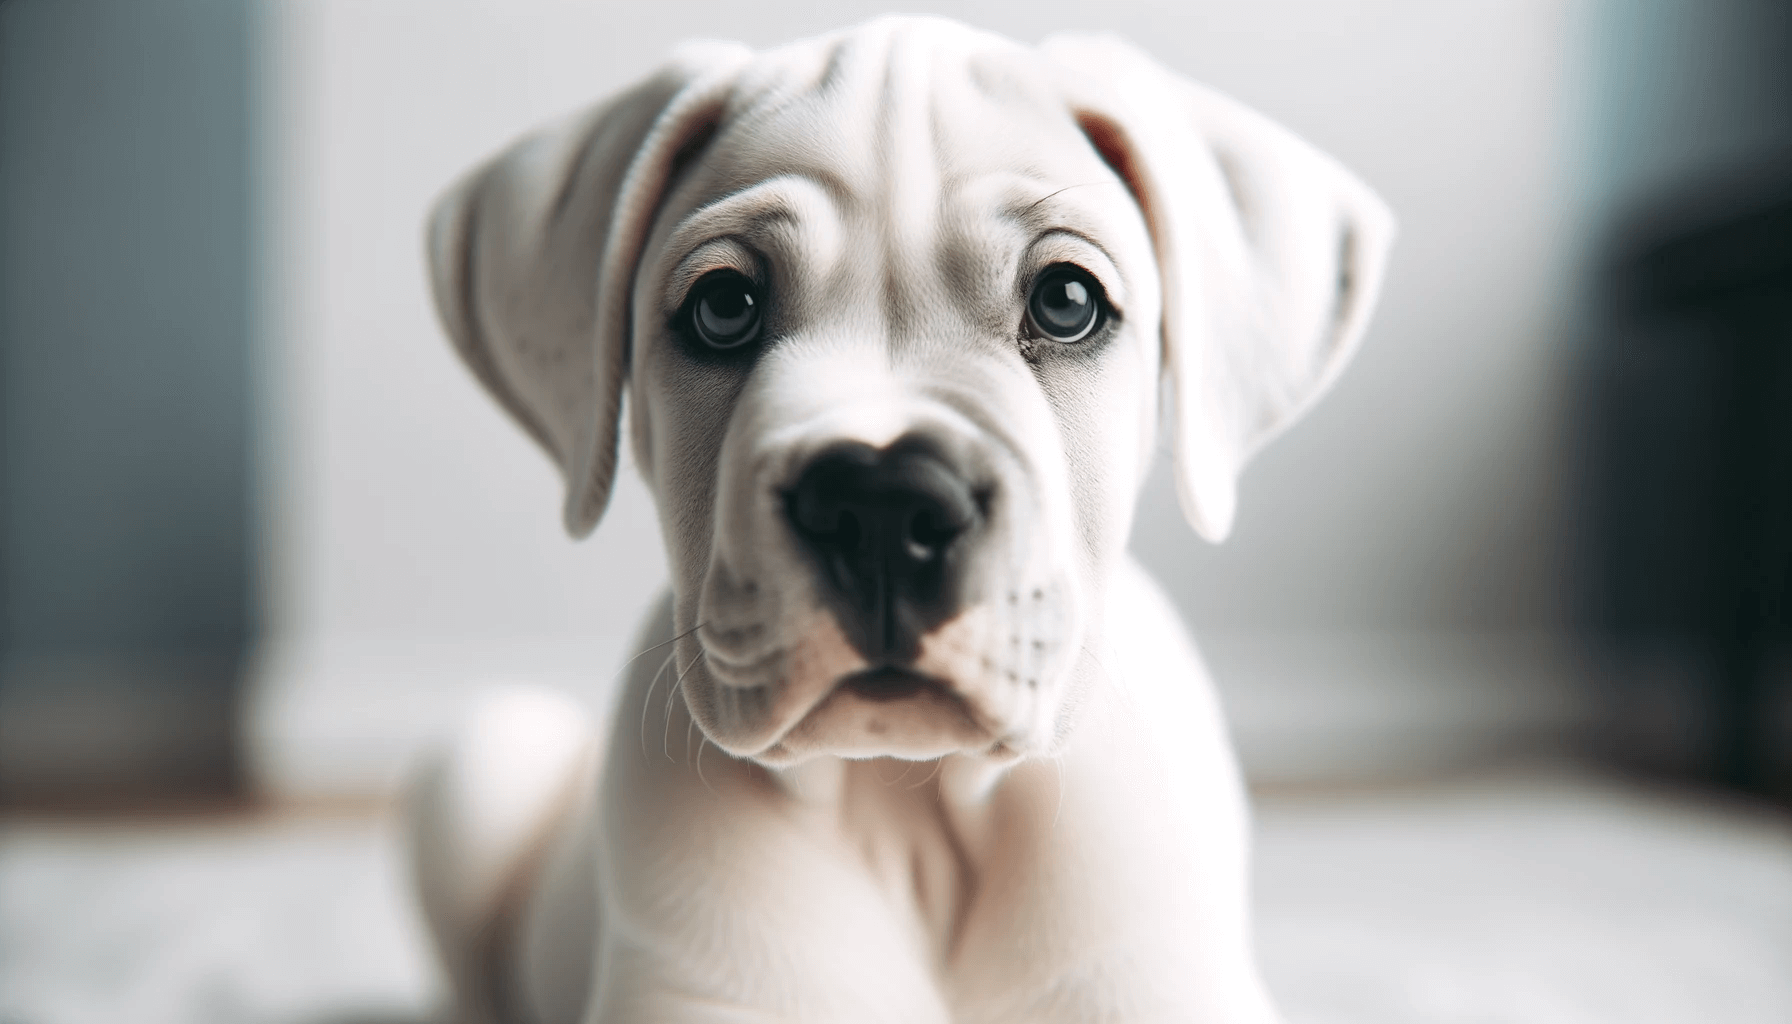 A youthful White Cane Corso puppy looking directly at the camera. The image highlights its youthful innocence.